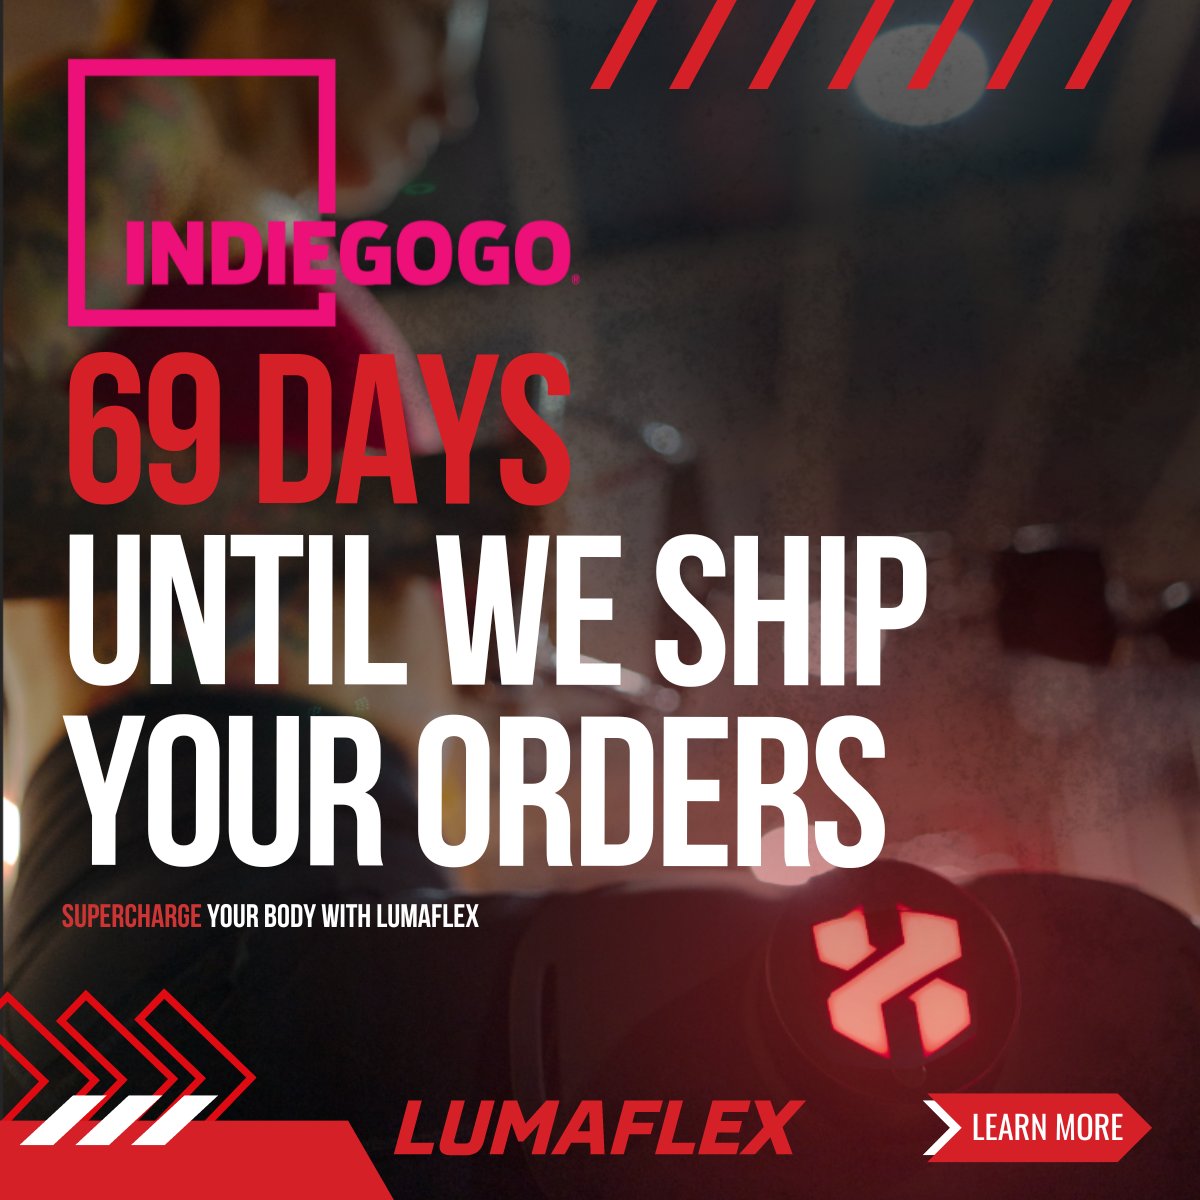 ⚡️ Get ready to experience the power of red-light therapy for enhanced performance and recovery. Mark your calendars as our Indiegogo campaign launches in a little more than 1 week! Stay tuned. That means! ⏳ Only 69 days 😁 left until your Lumaflex orders ship!🎉#CountdownBegins